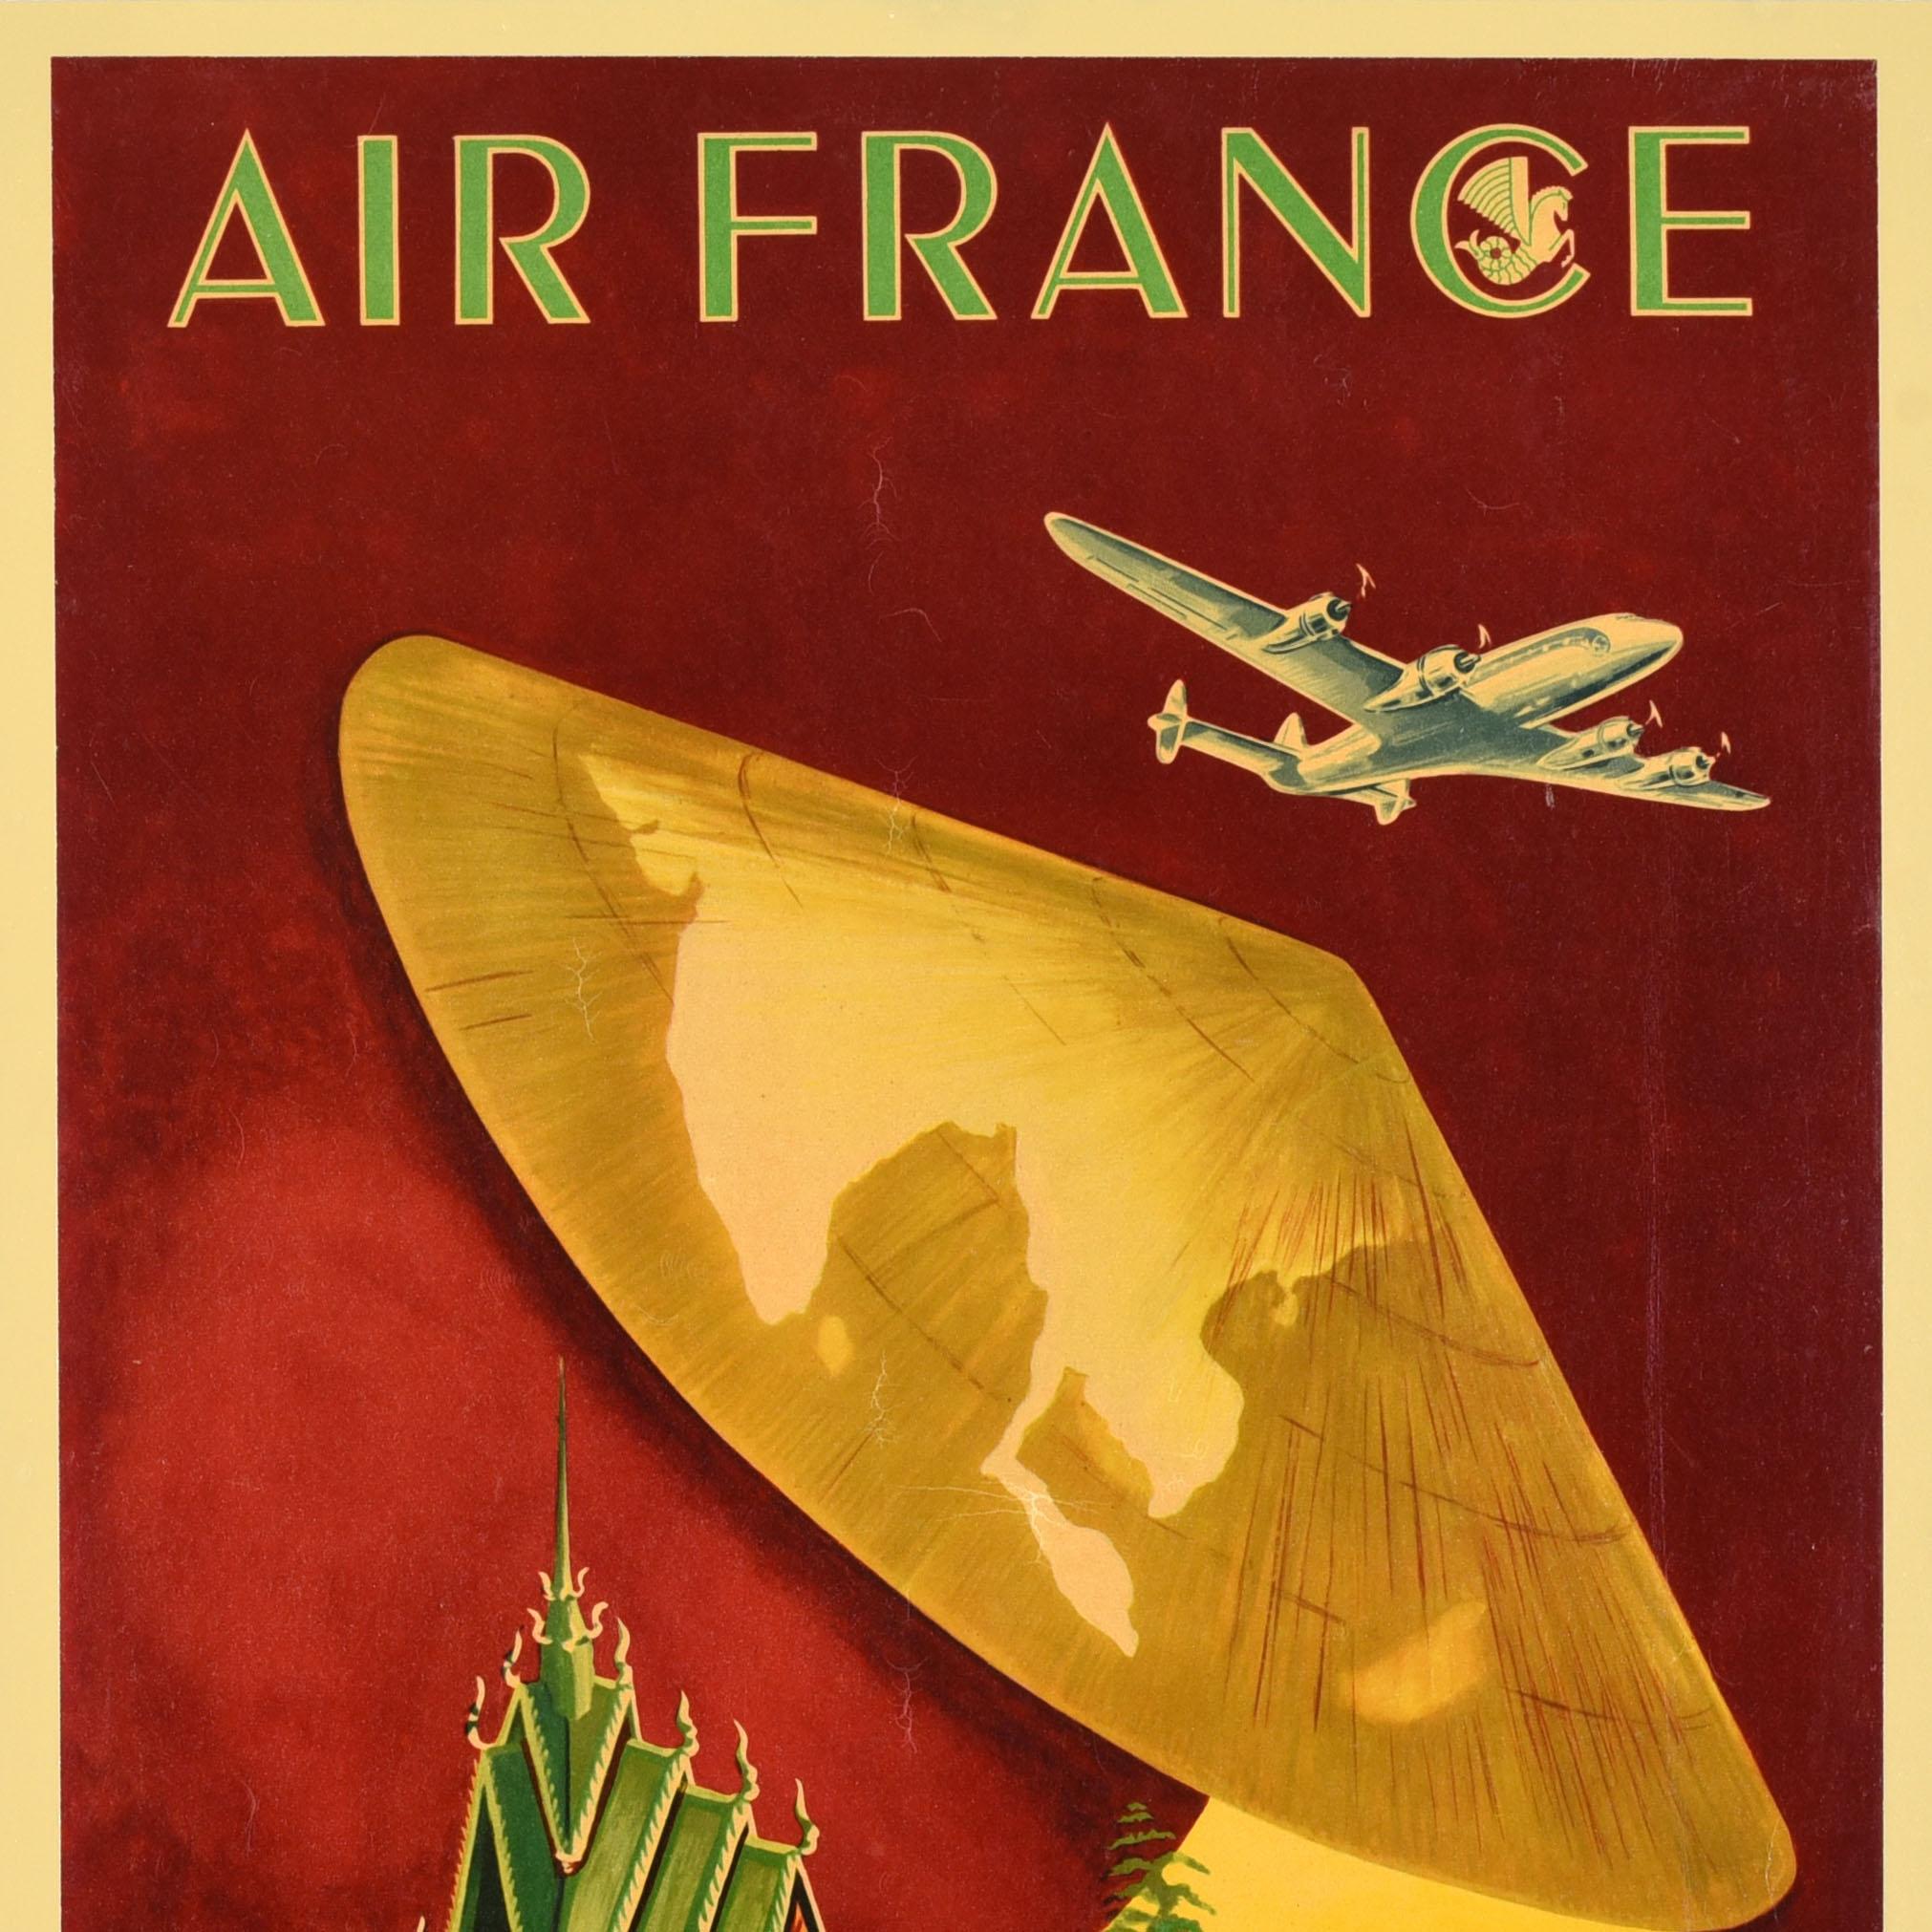 French Original Vintage Travel Poster Air France Airline Extremo Oriente Far East Asia